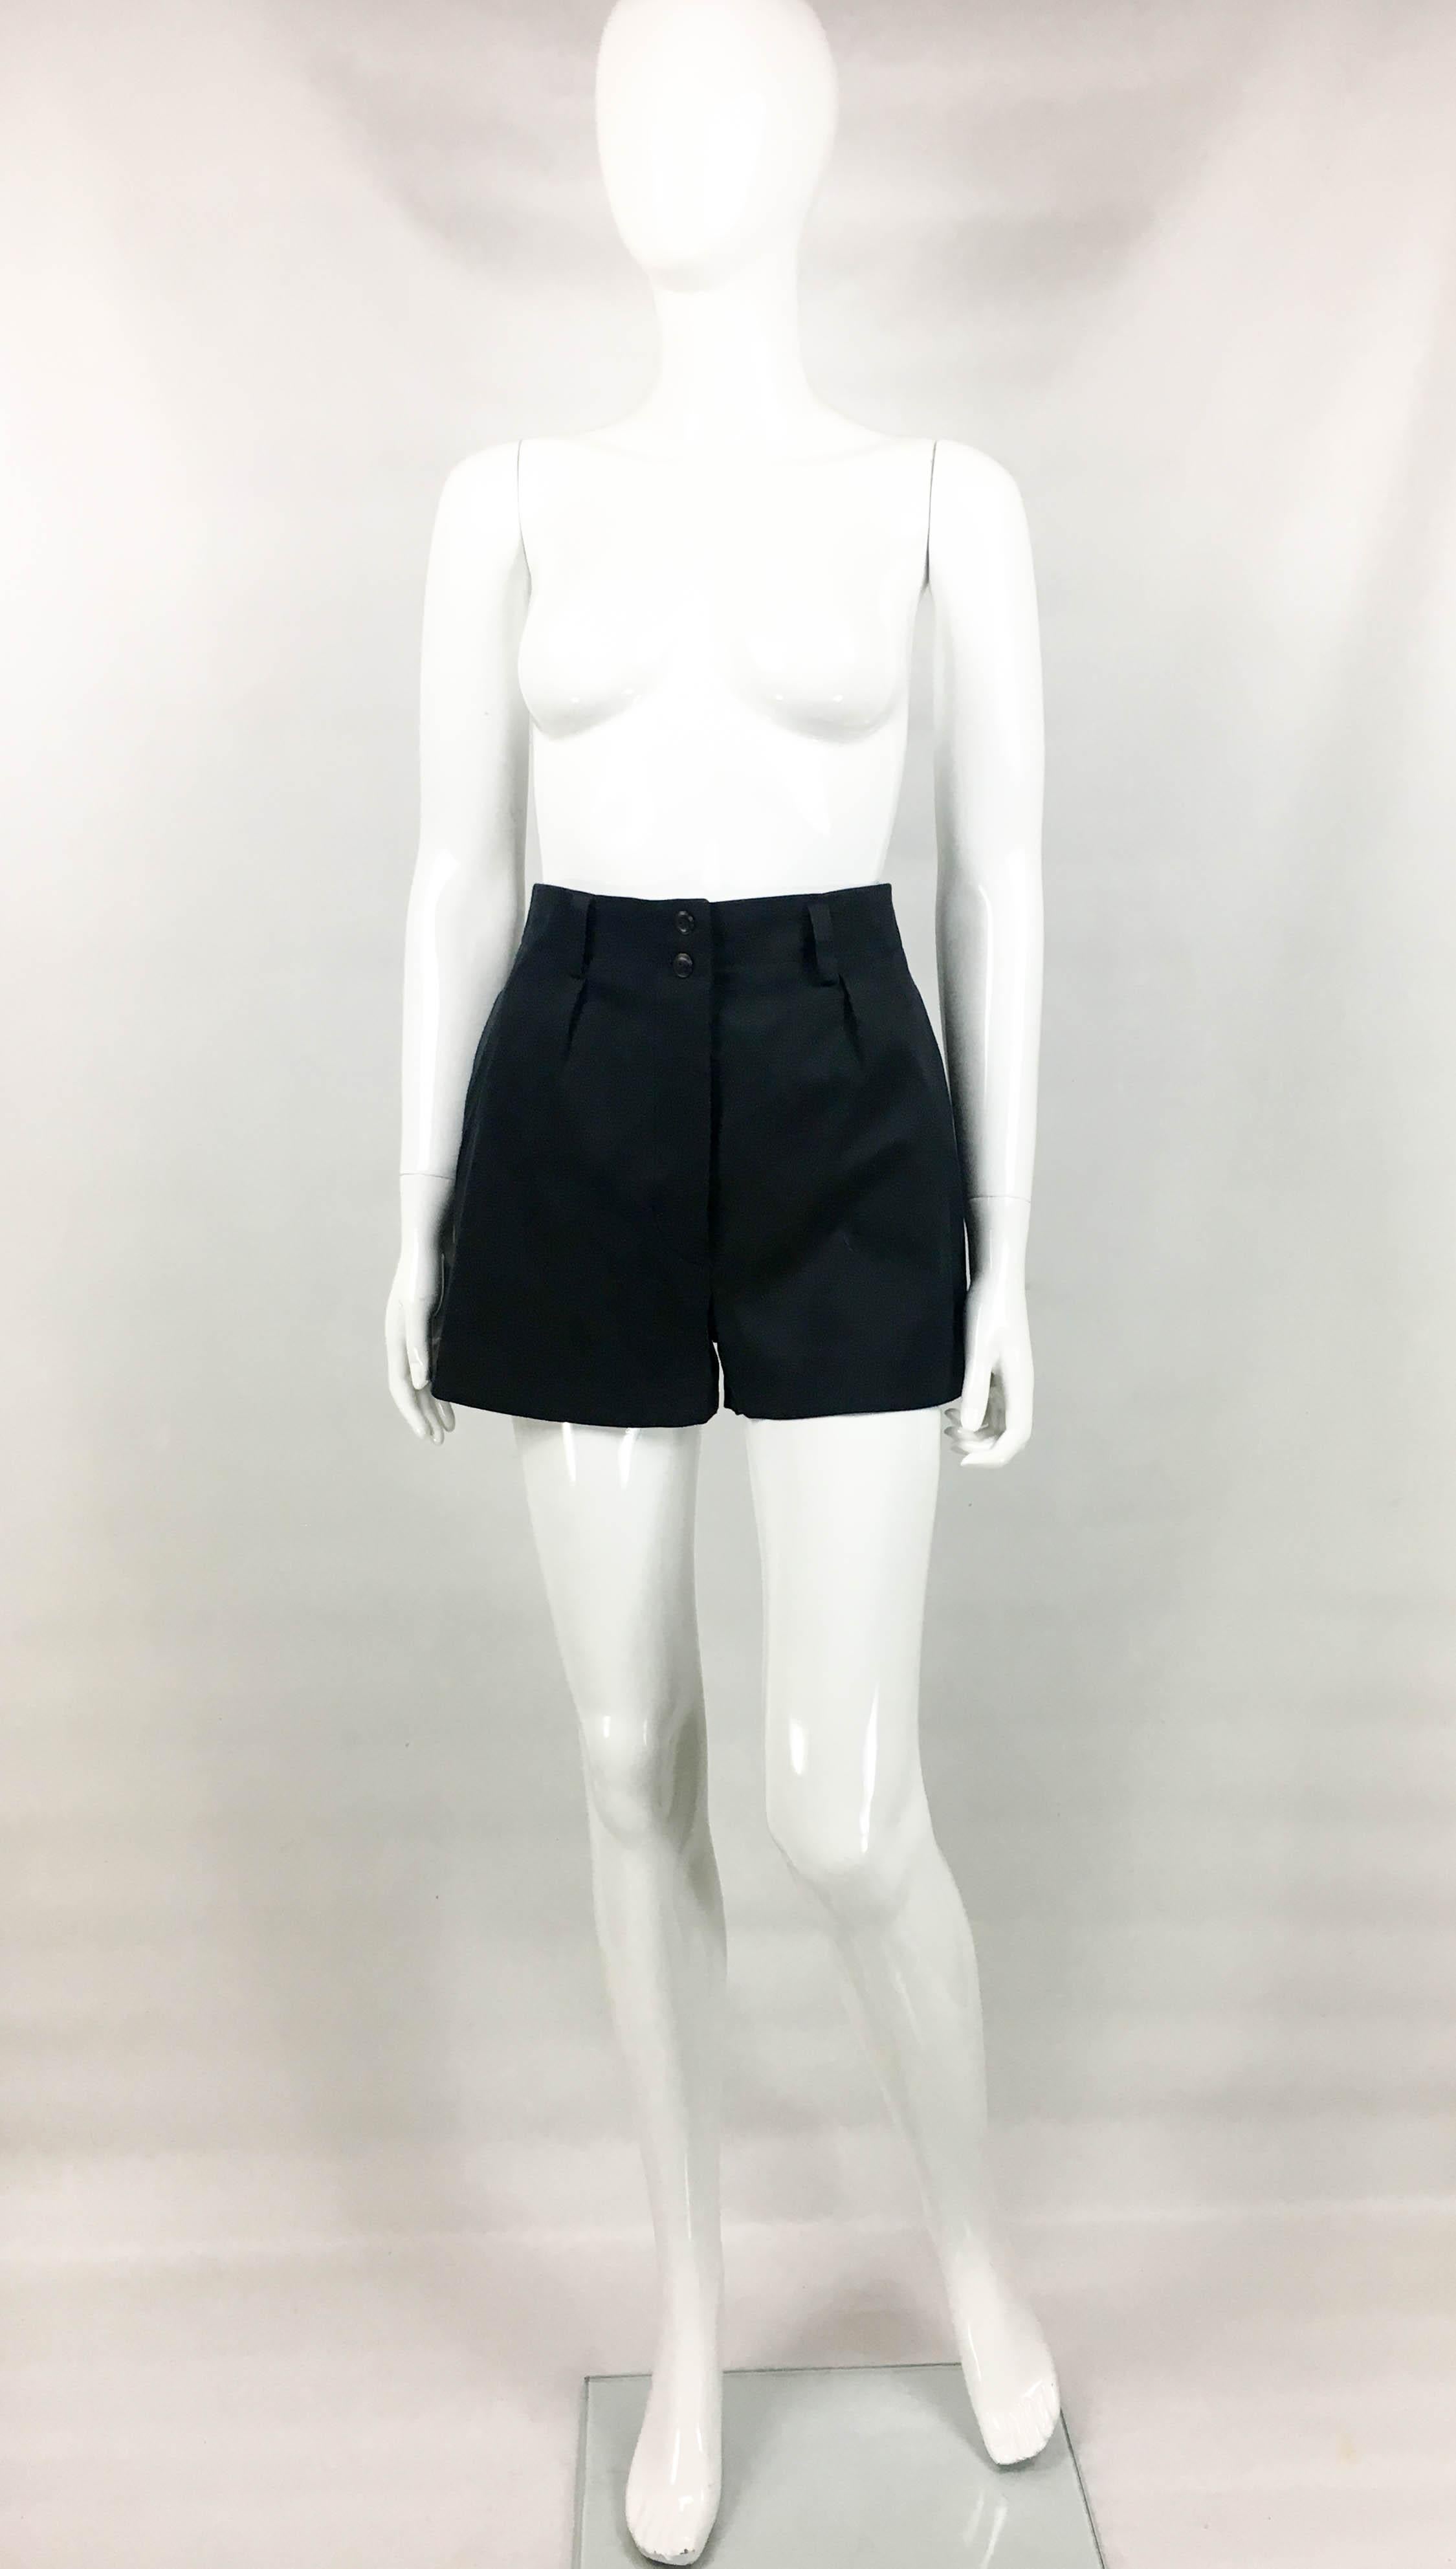 Vintage Alaia Black Cotton Shorts. These very cute shorts by Azzedine Alaia date back from the 1990’s. Made in cotton blend, these tailored shorts have a high waist, side pockets and one pocket on the back. The fit is loose, and the silhouette is